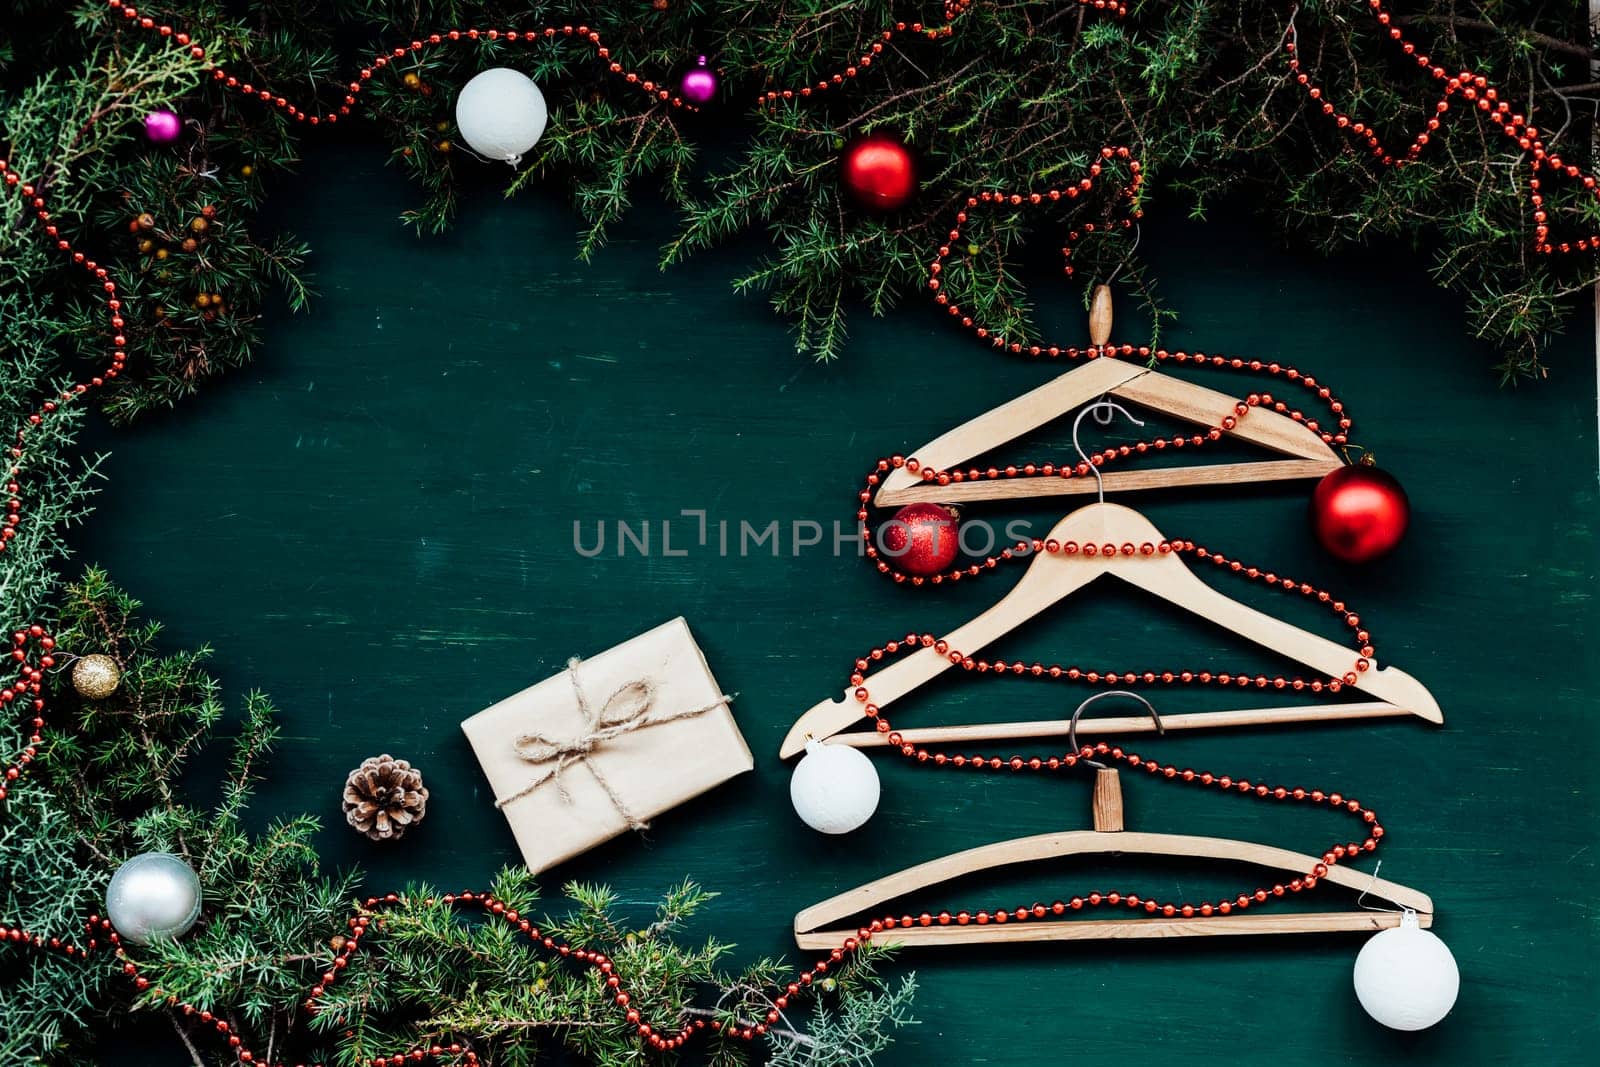 hangers from the wardrobe of clothes on Christmas new year tree by Simakov